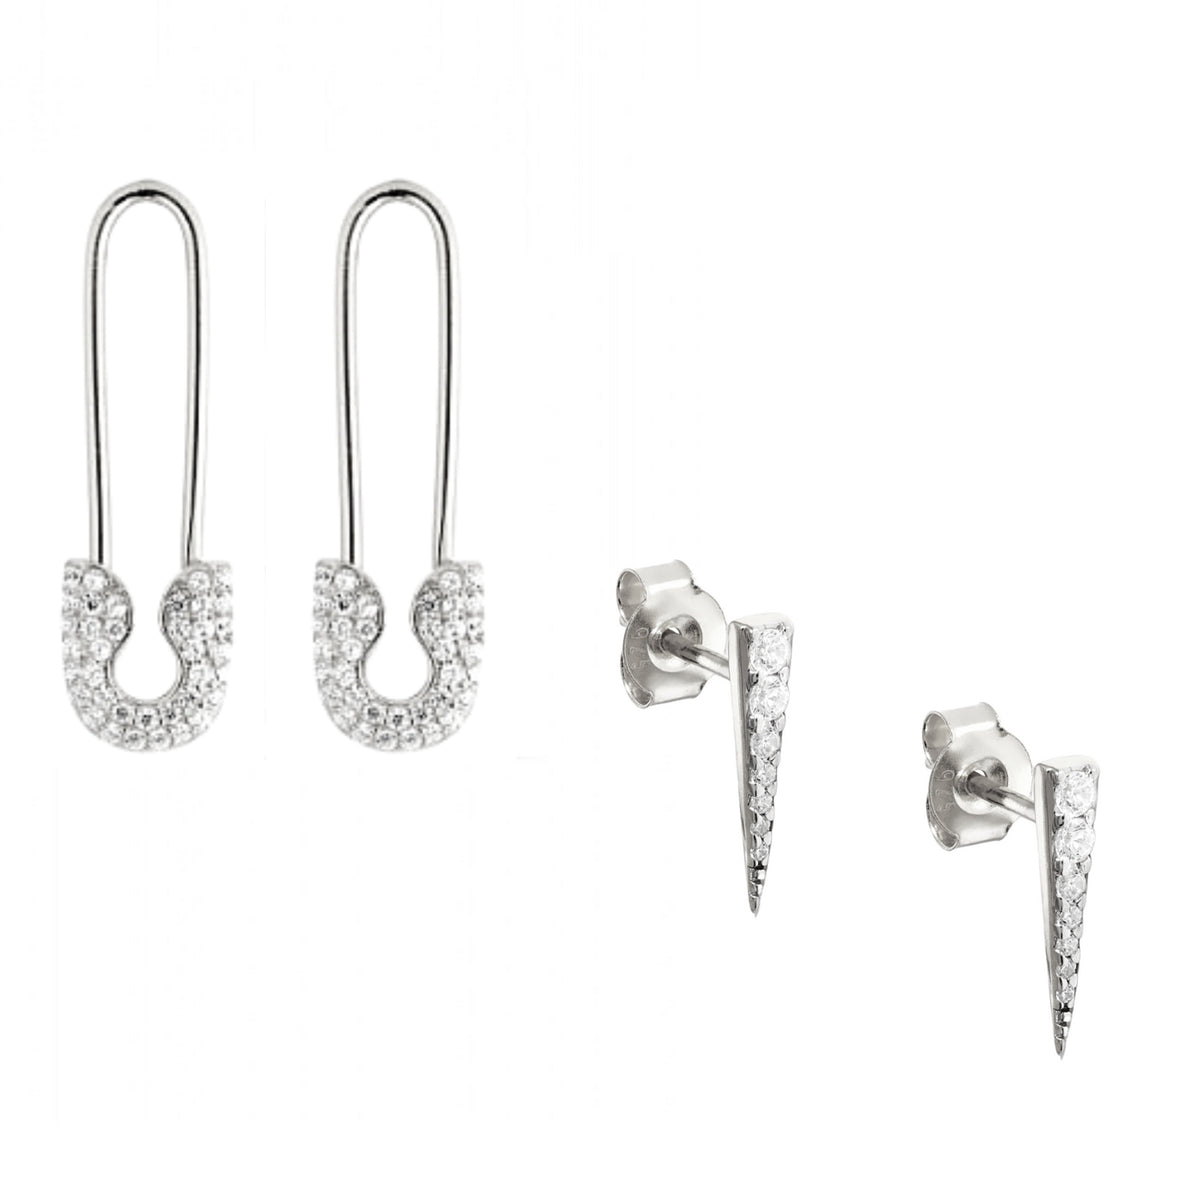 Long Pave Dagger Stud and Pave Safety Pin Earring Set